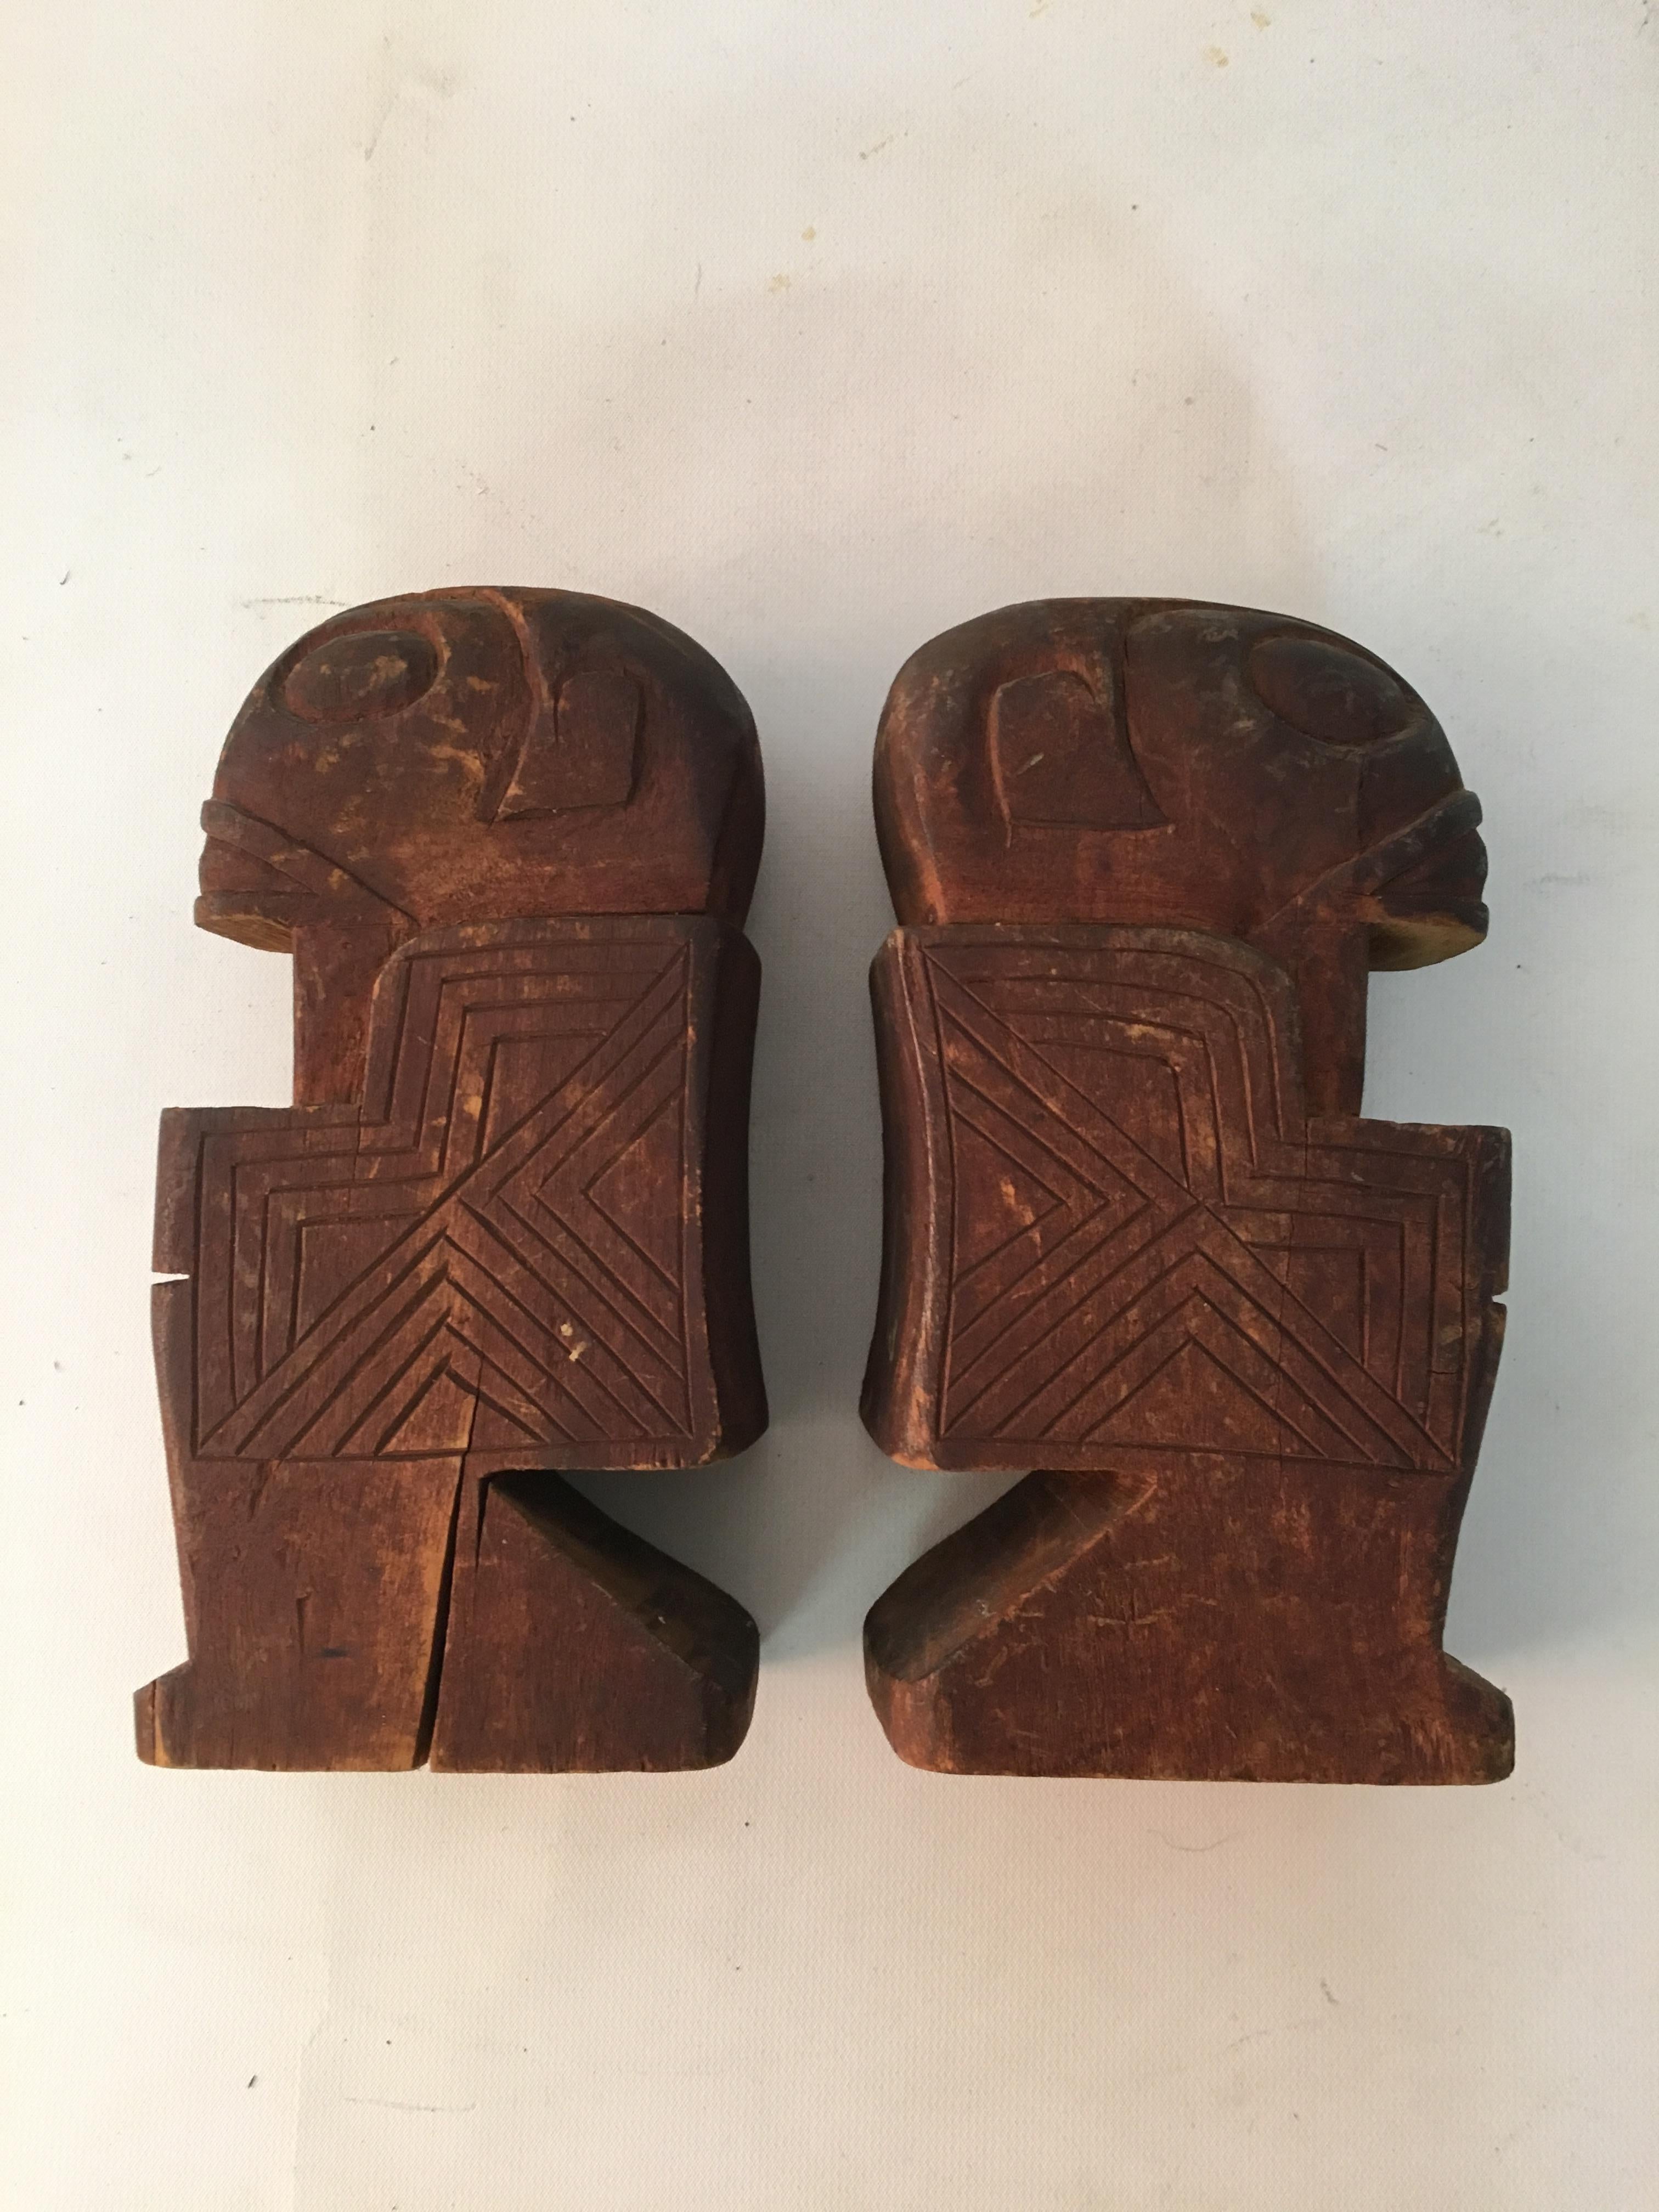 Early Carved Wood Marquesas Islands Votive Figures 1